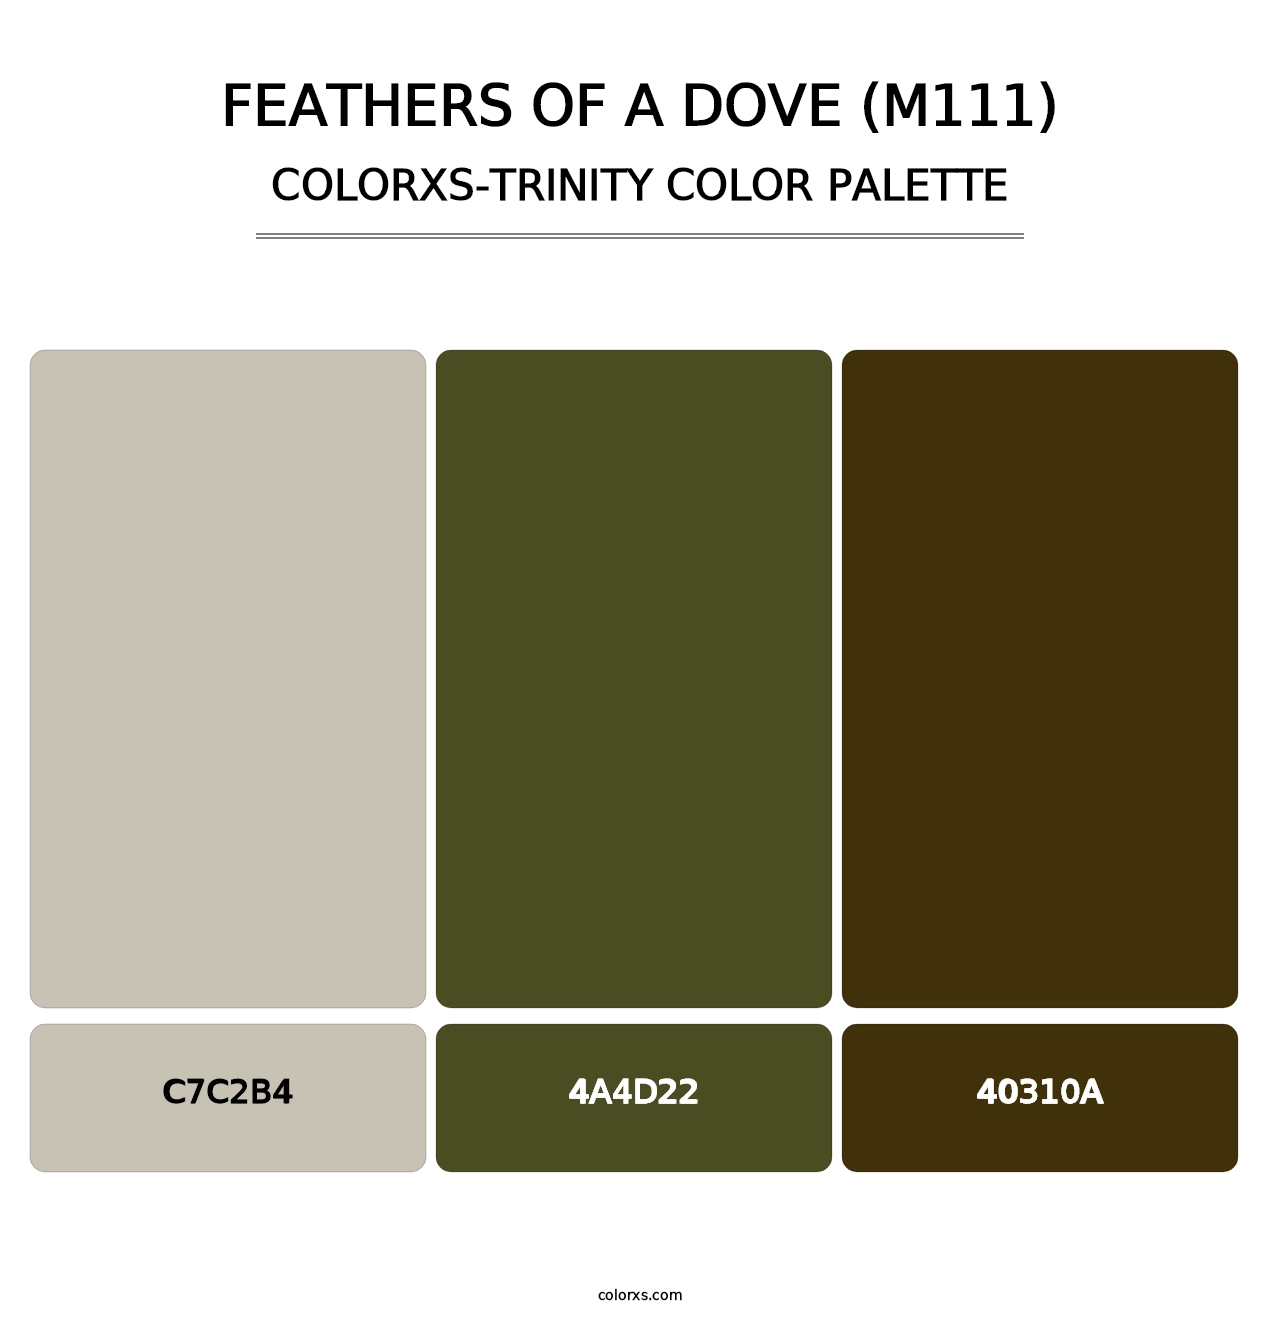 Feathers of a Dove (M111) - Colorxs Trinity Palette